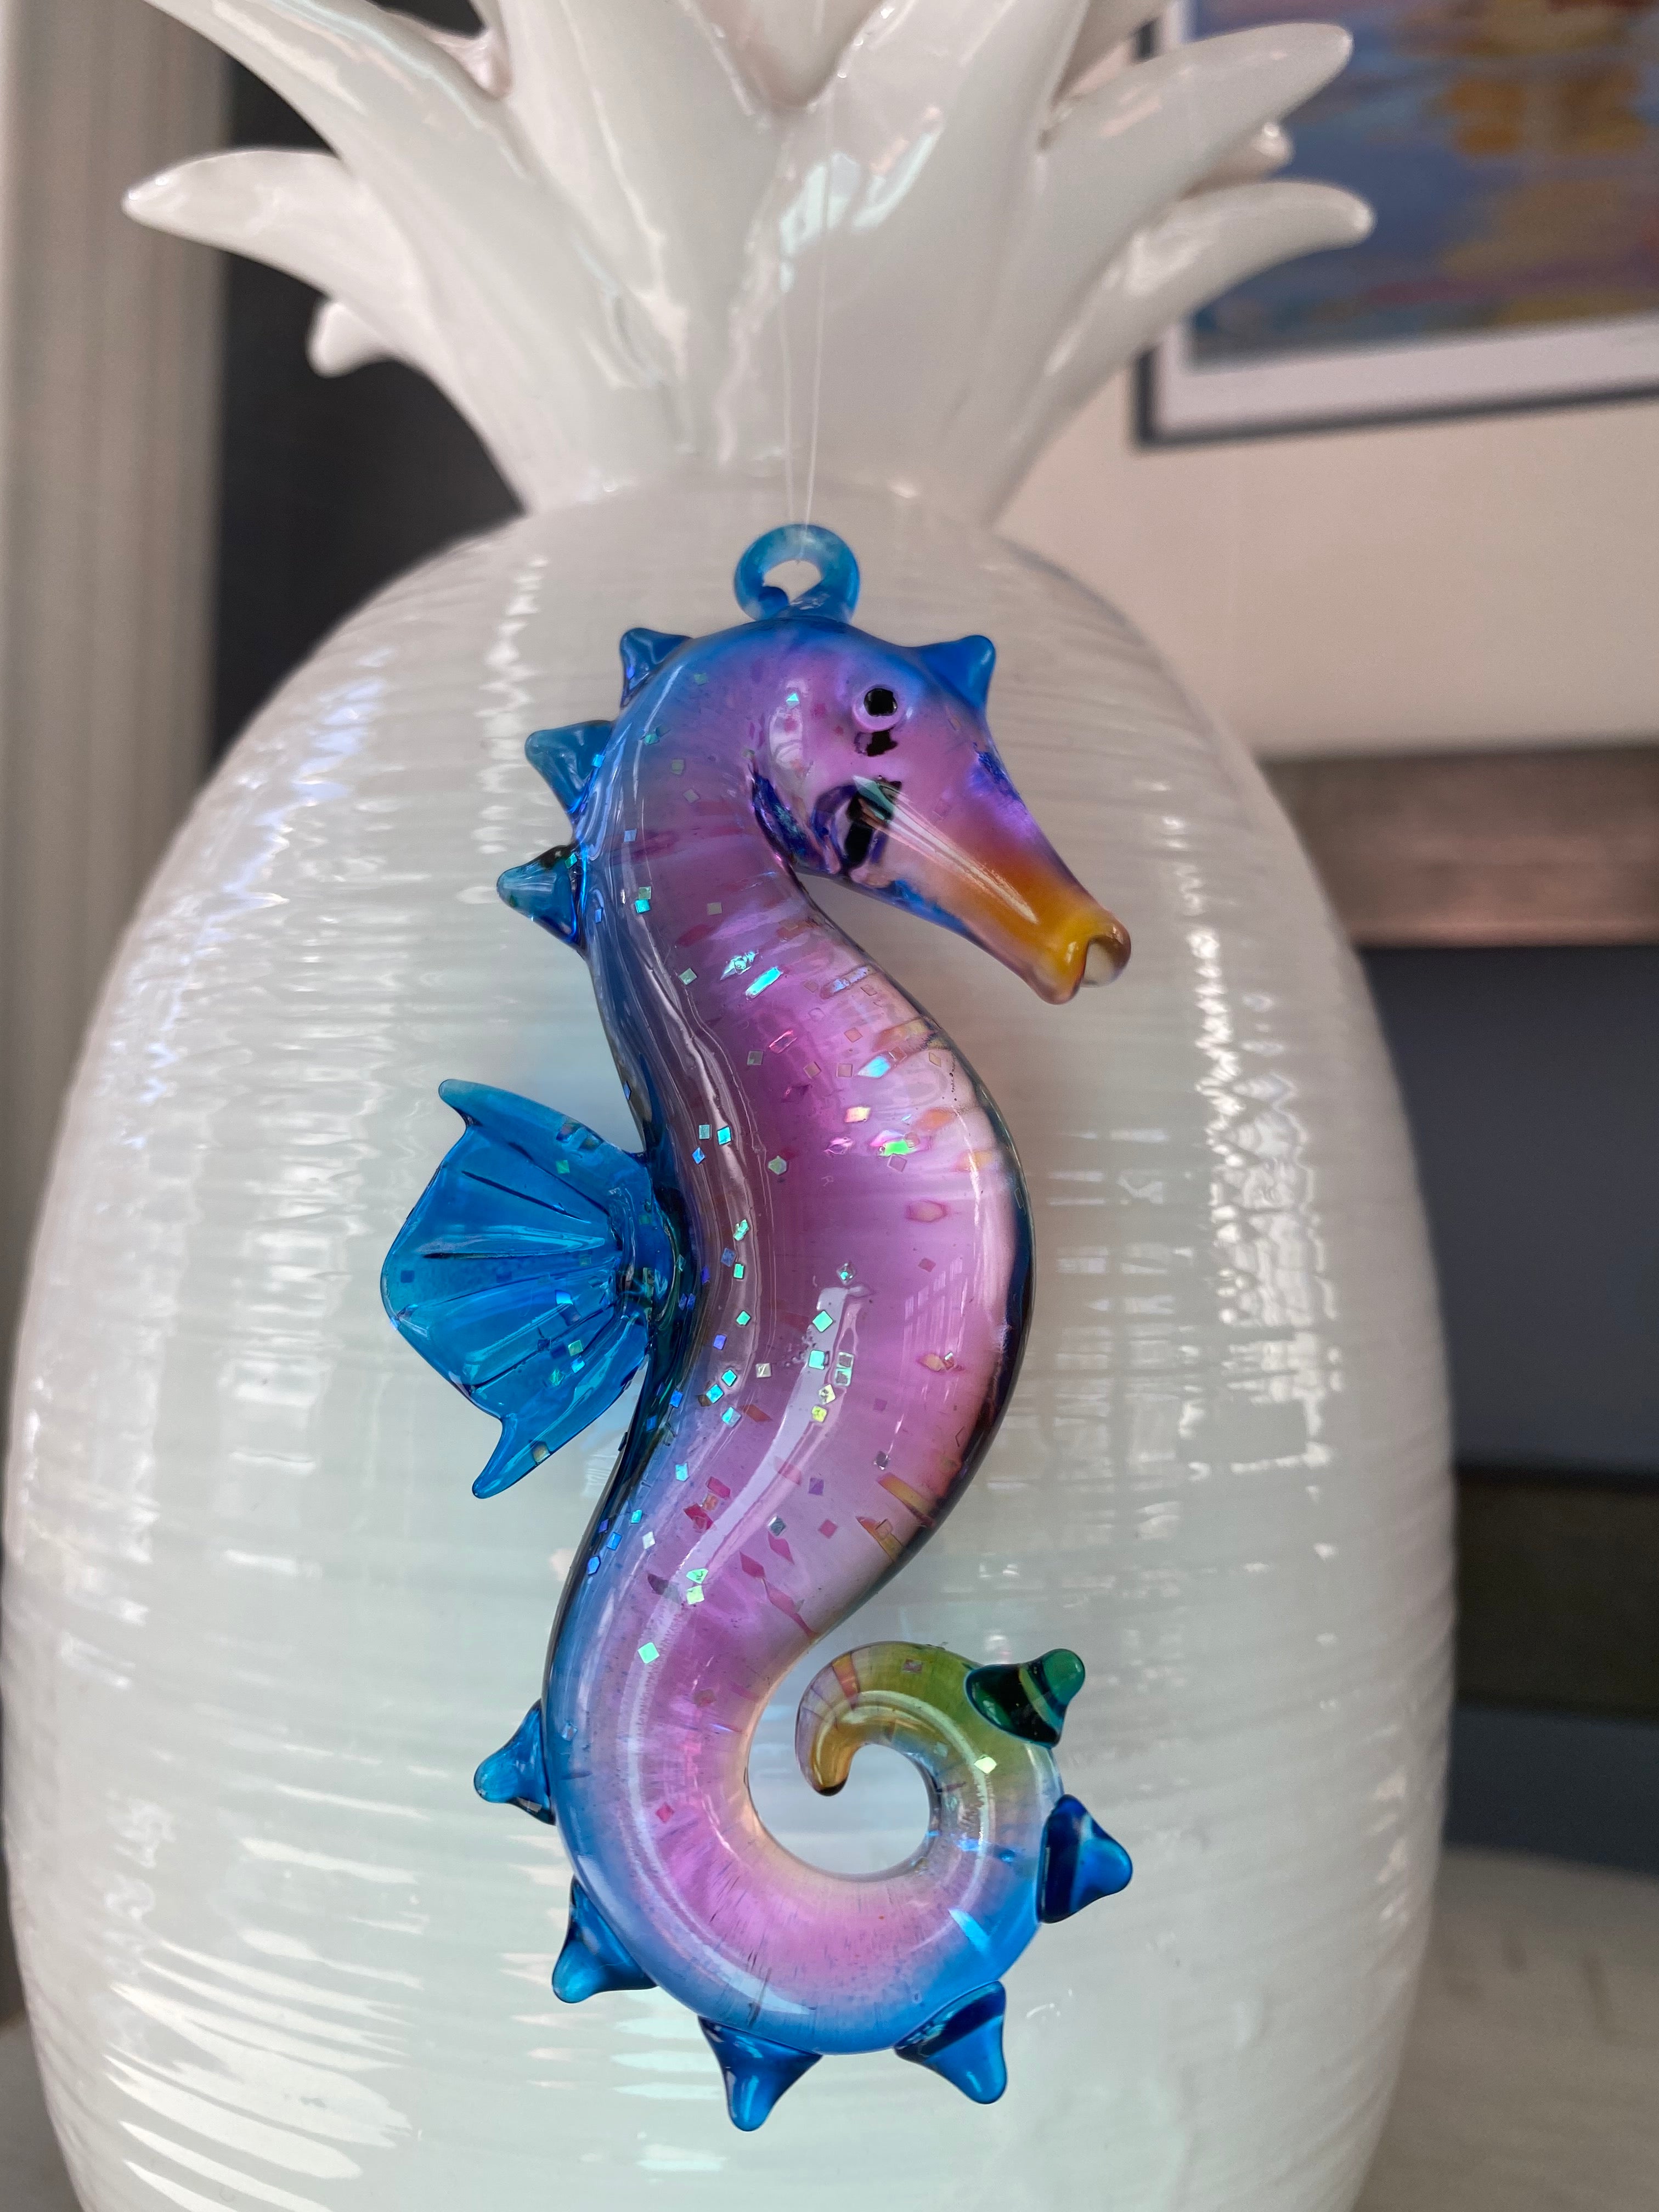 Sparkly Glass Seahorse Ornaments - 3 Great Color Combos Available